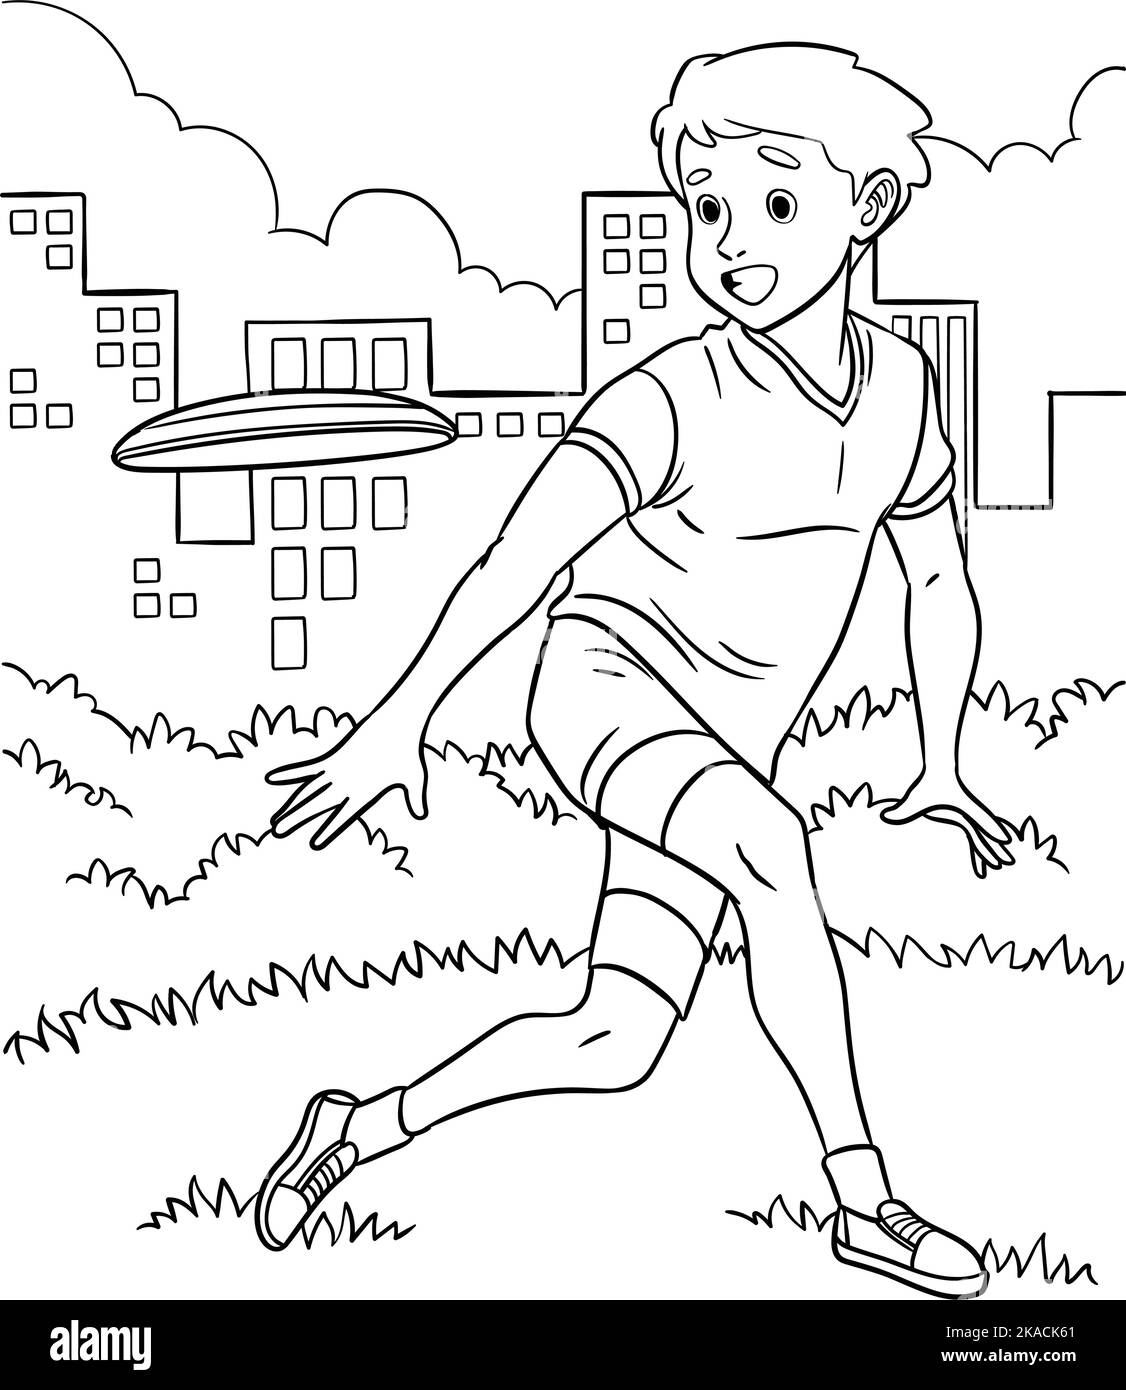 Frisbee Coloring Page for Kids Stock Vector